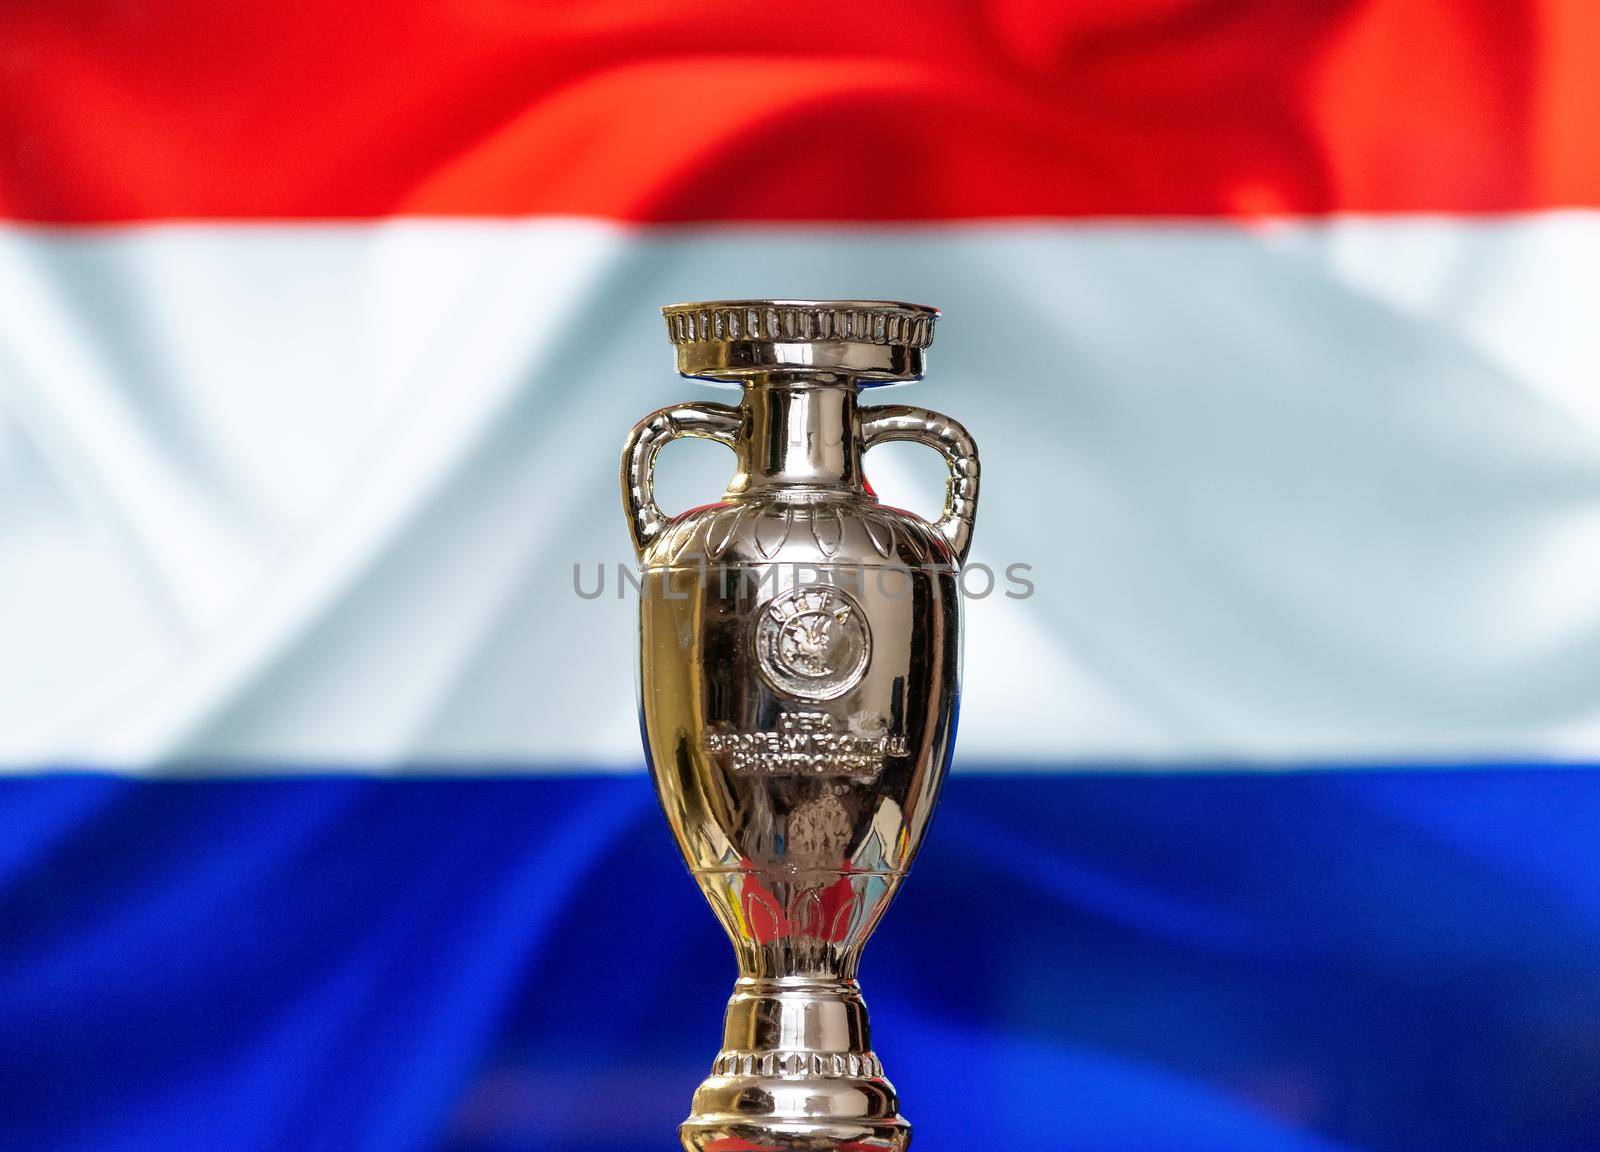 April 10, 2021. Amsterdam, Holland. UEFA European Championship Cup with the Netherlands flag in the background.